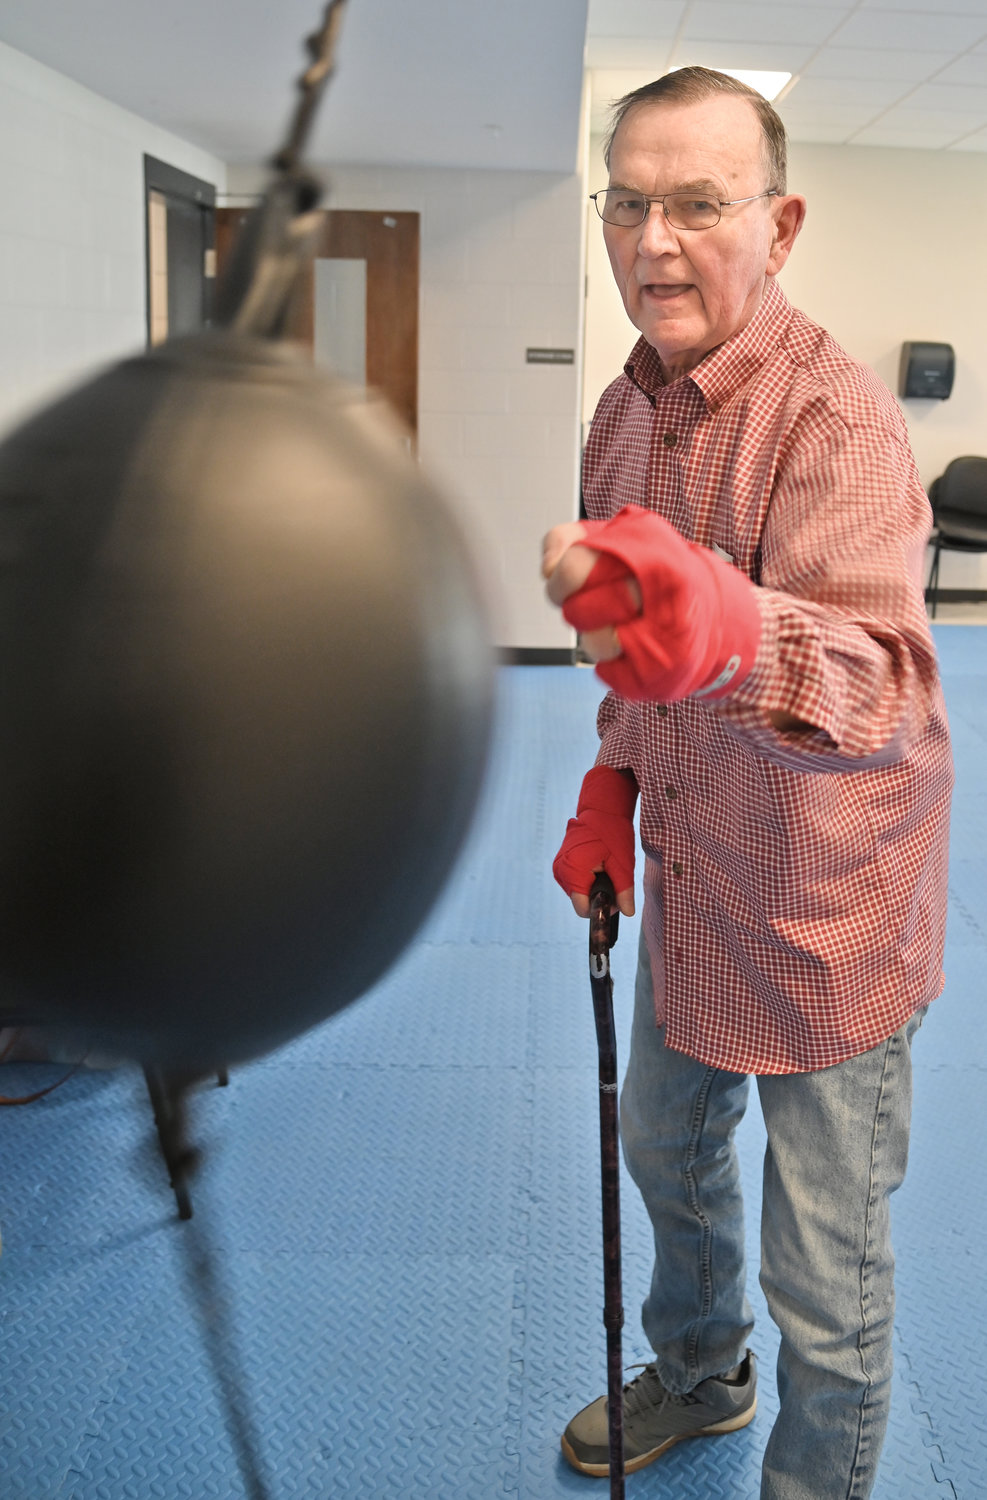 William Angell slugs the speed ball before he puts the boxing gloves on to hit the bag.